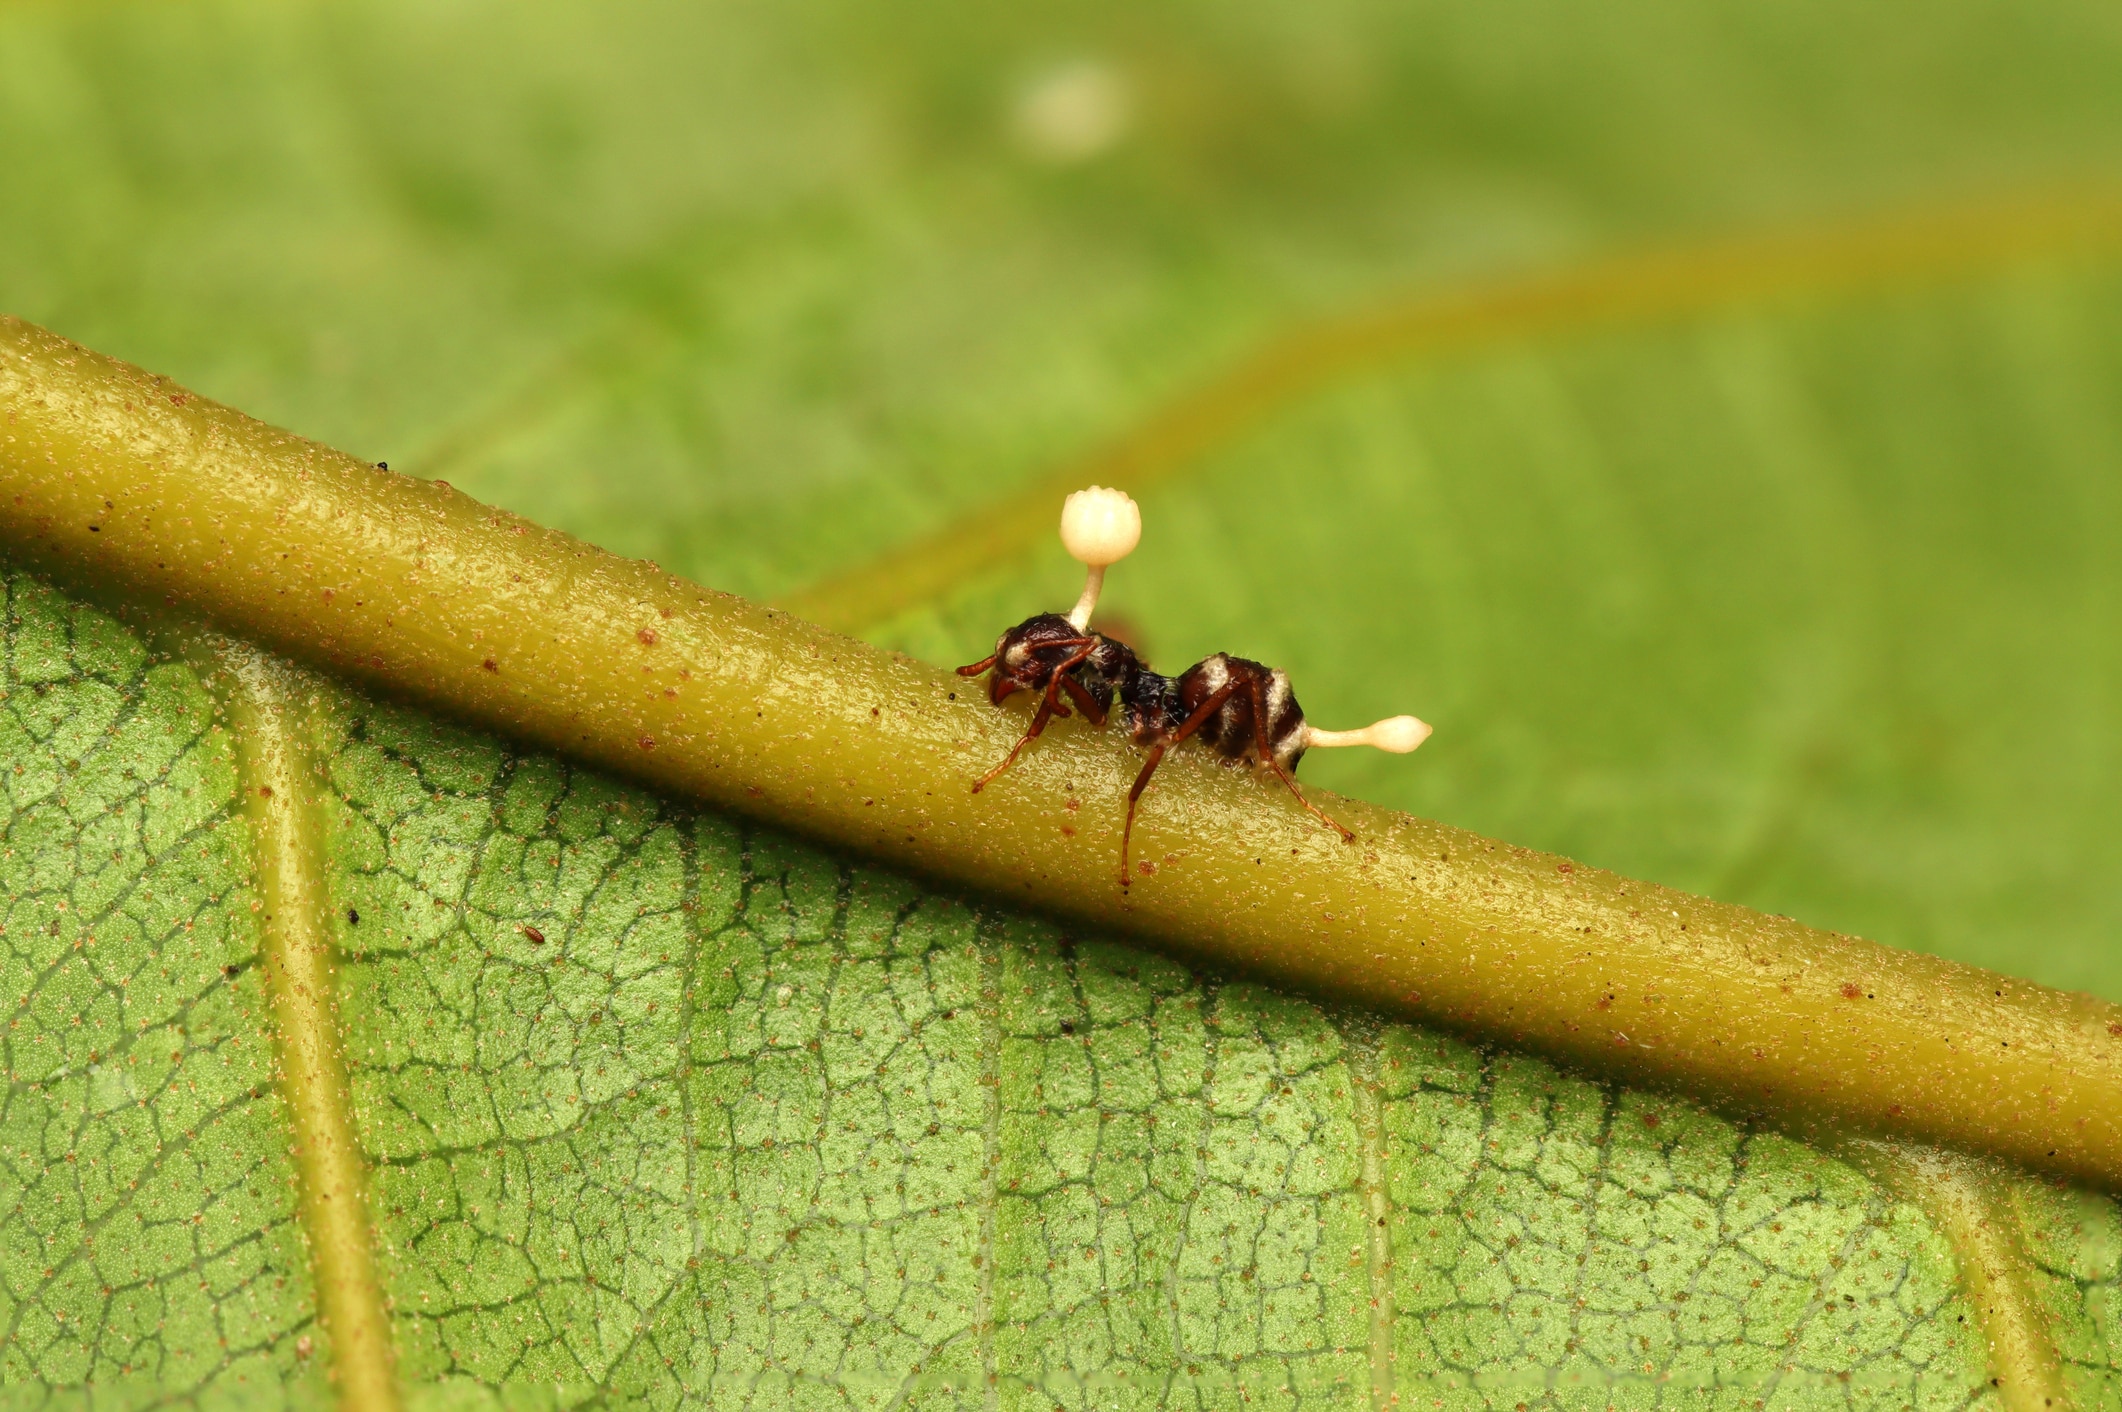 Ant on leaf with fungus growing from body